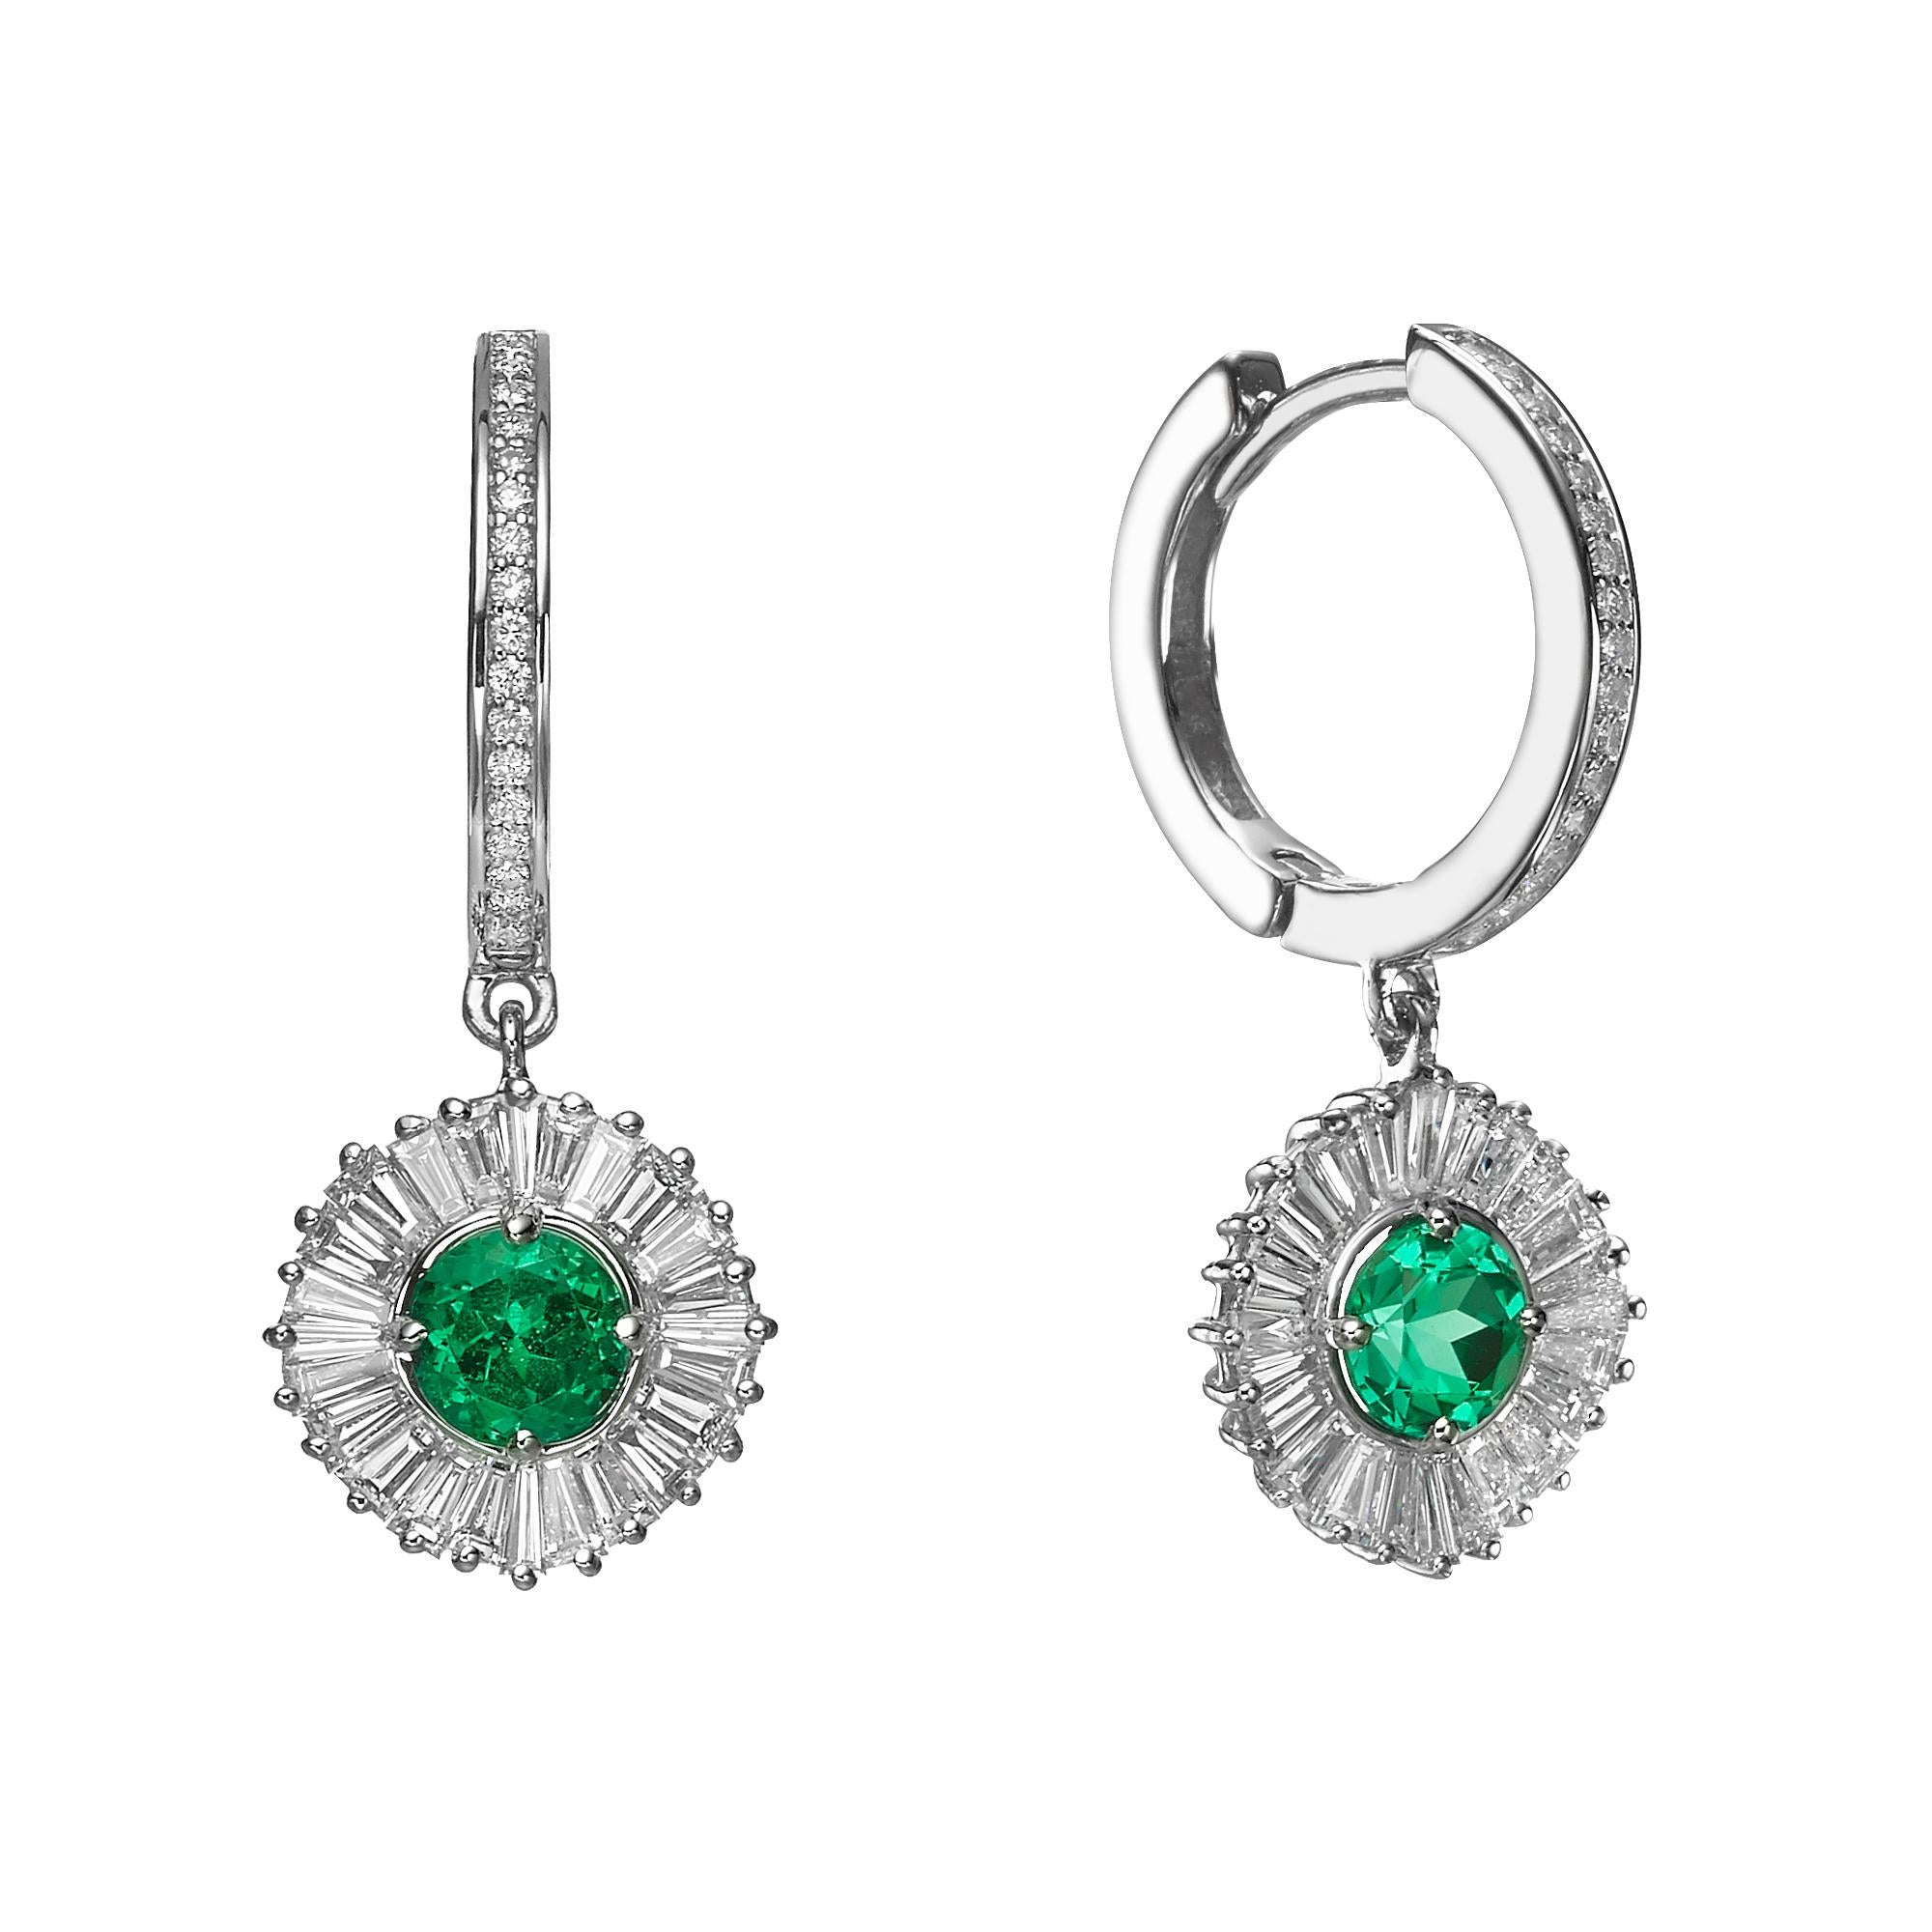 One of a Kind Ballerina Style Emerald and diamonds Earrings starring 2 natural emeralds 1.2 Carats and surrounded by 48 Baguette cut diamonds and 34 round diamonds. 
Jewel Details: 
Center-
2  Natural Emeralds, Round Brilliant cut
1.2 Carat Total